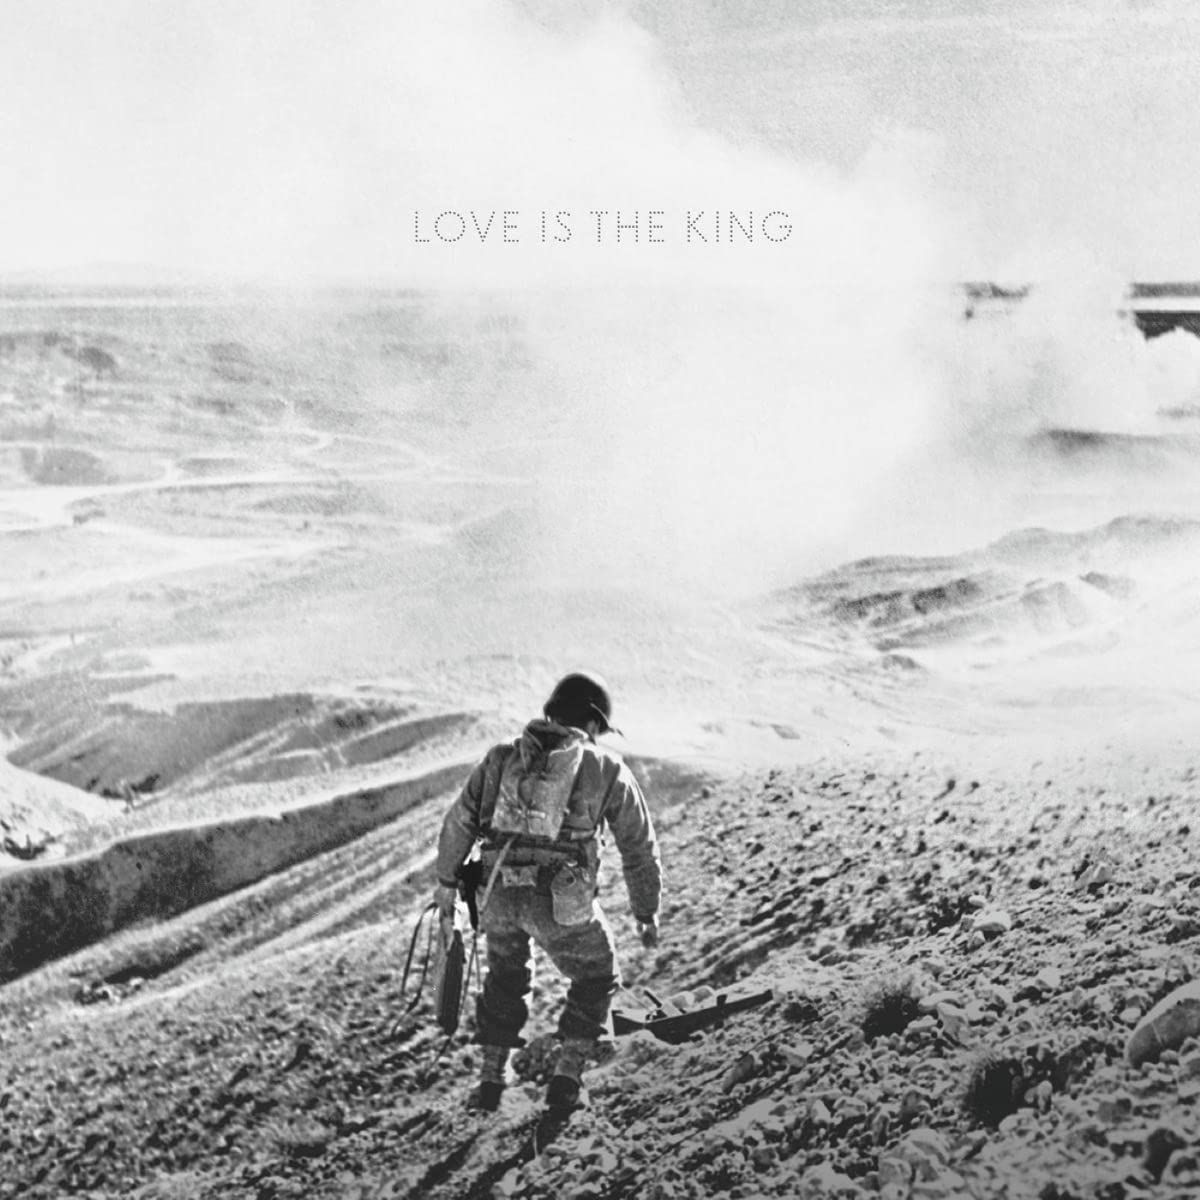 LOVE IS THE KING / LIVE IS THE